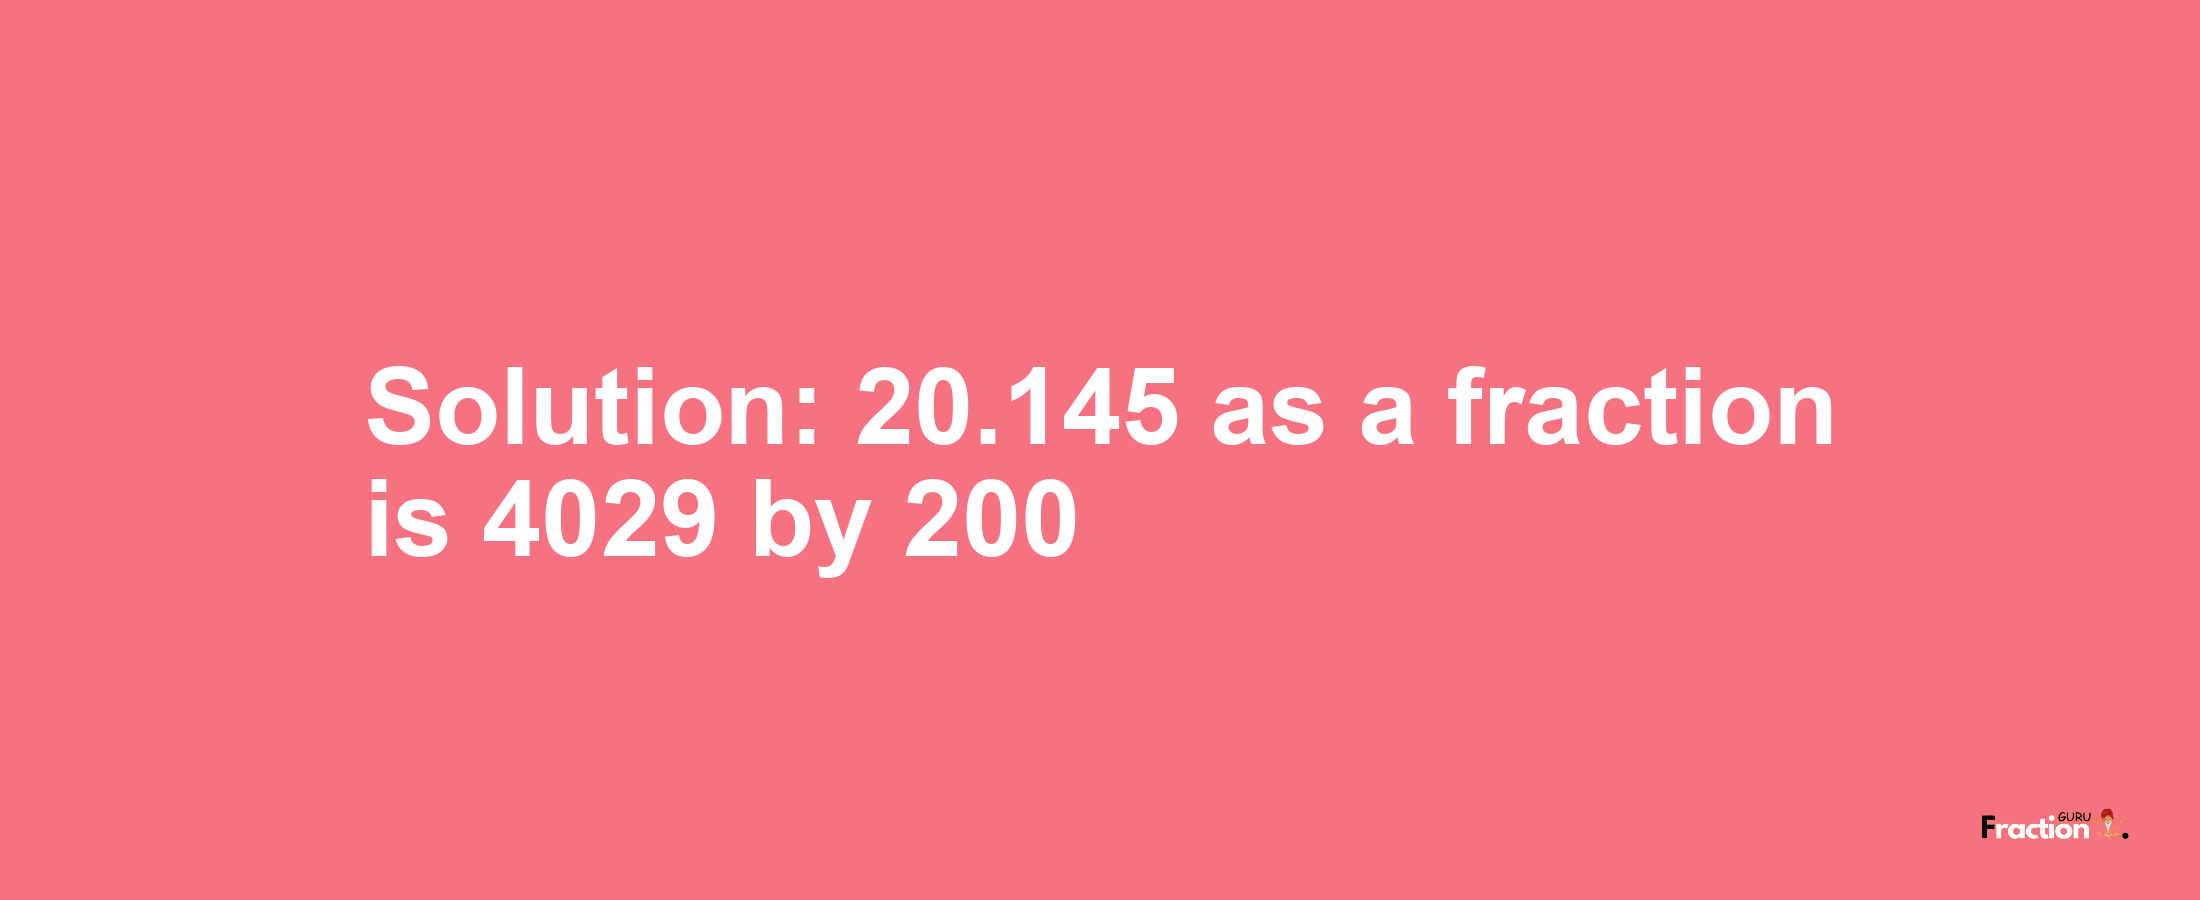 Solution:20.145 as a fraction is 4029/200